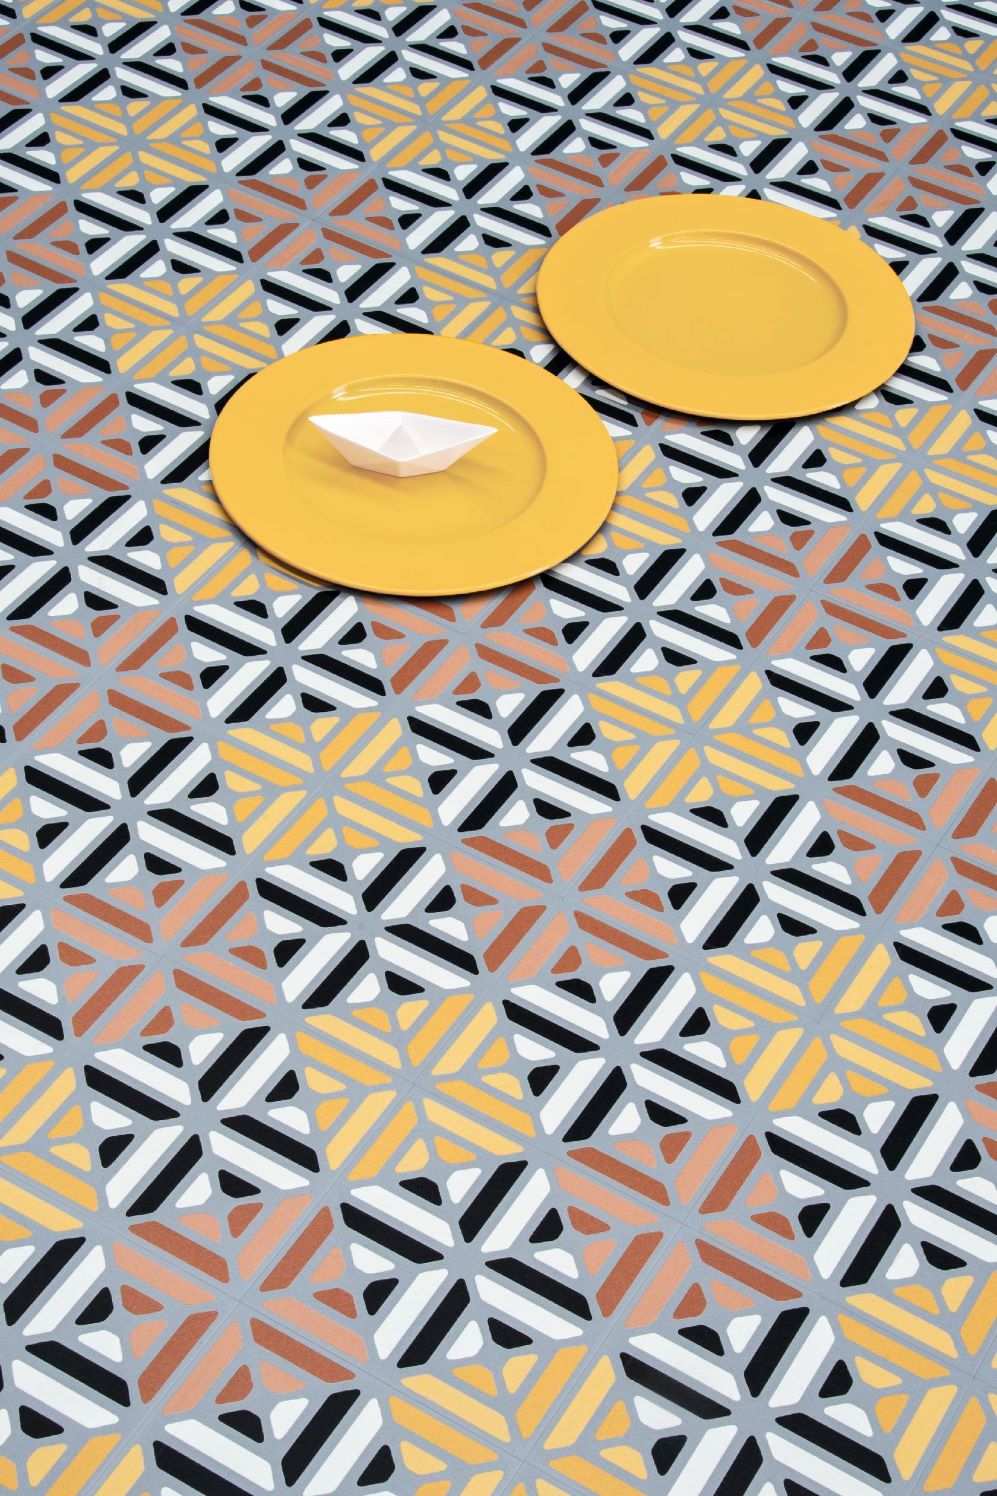 Fun Summer 02 | Stones & More | Finest selection of Mosaics, Glass, Tile and Stone